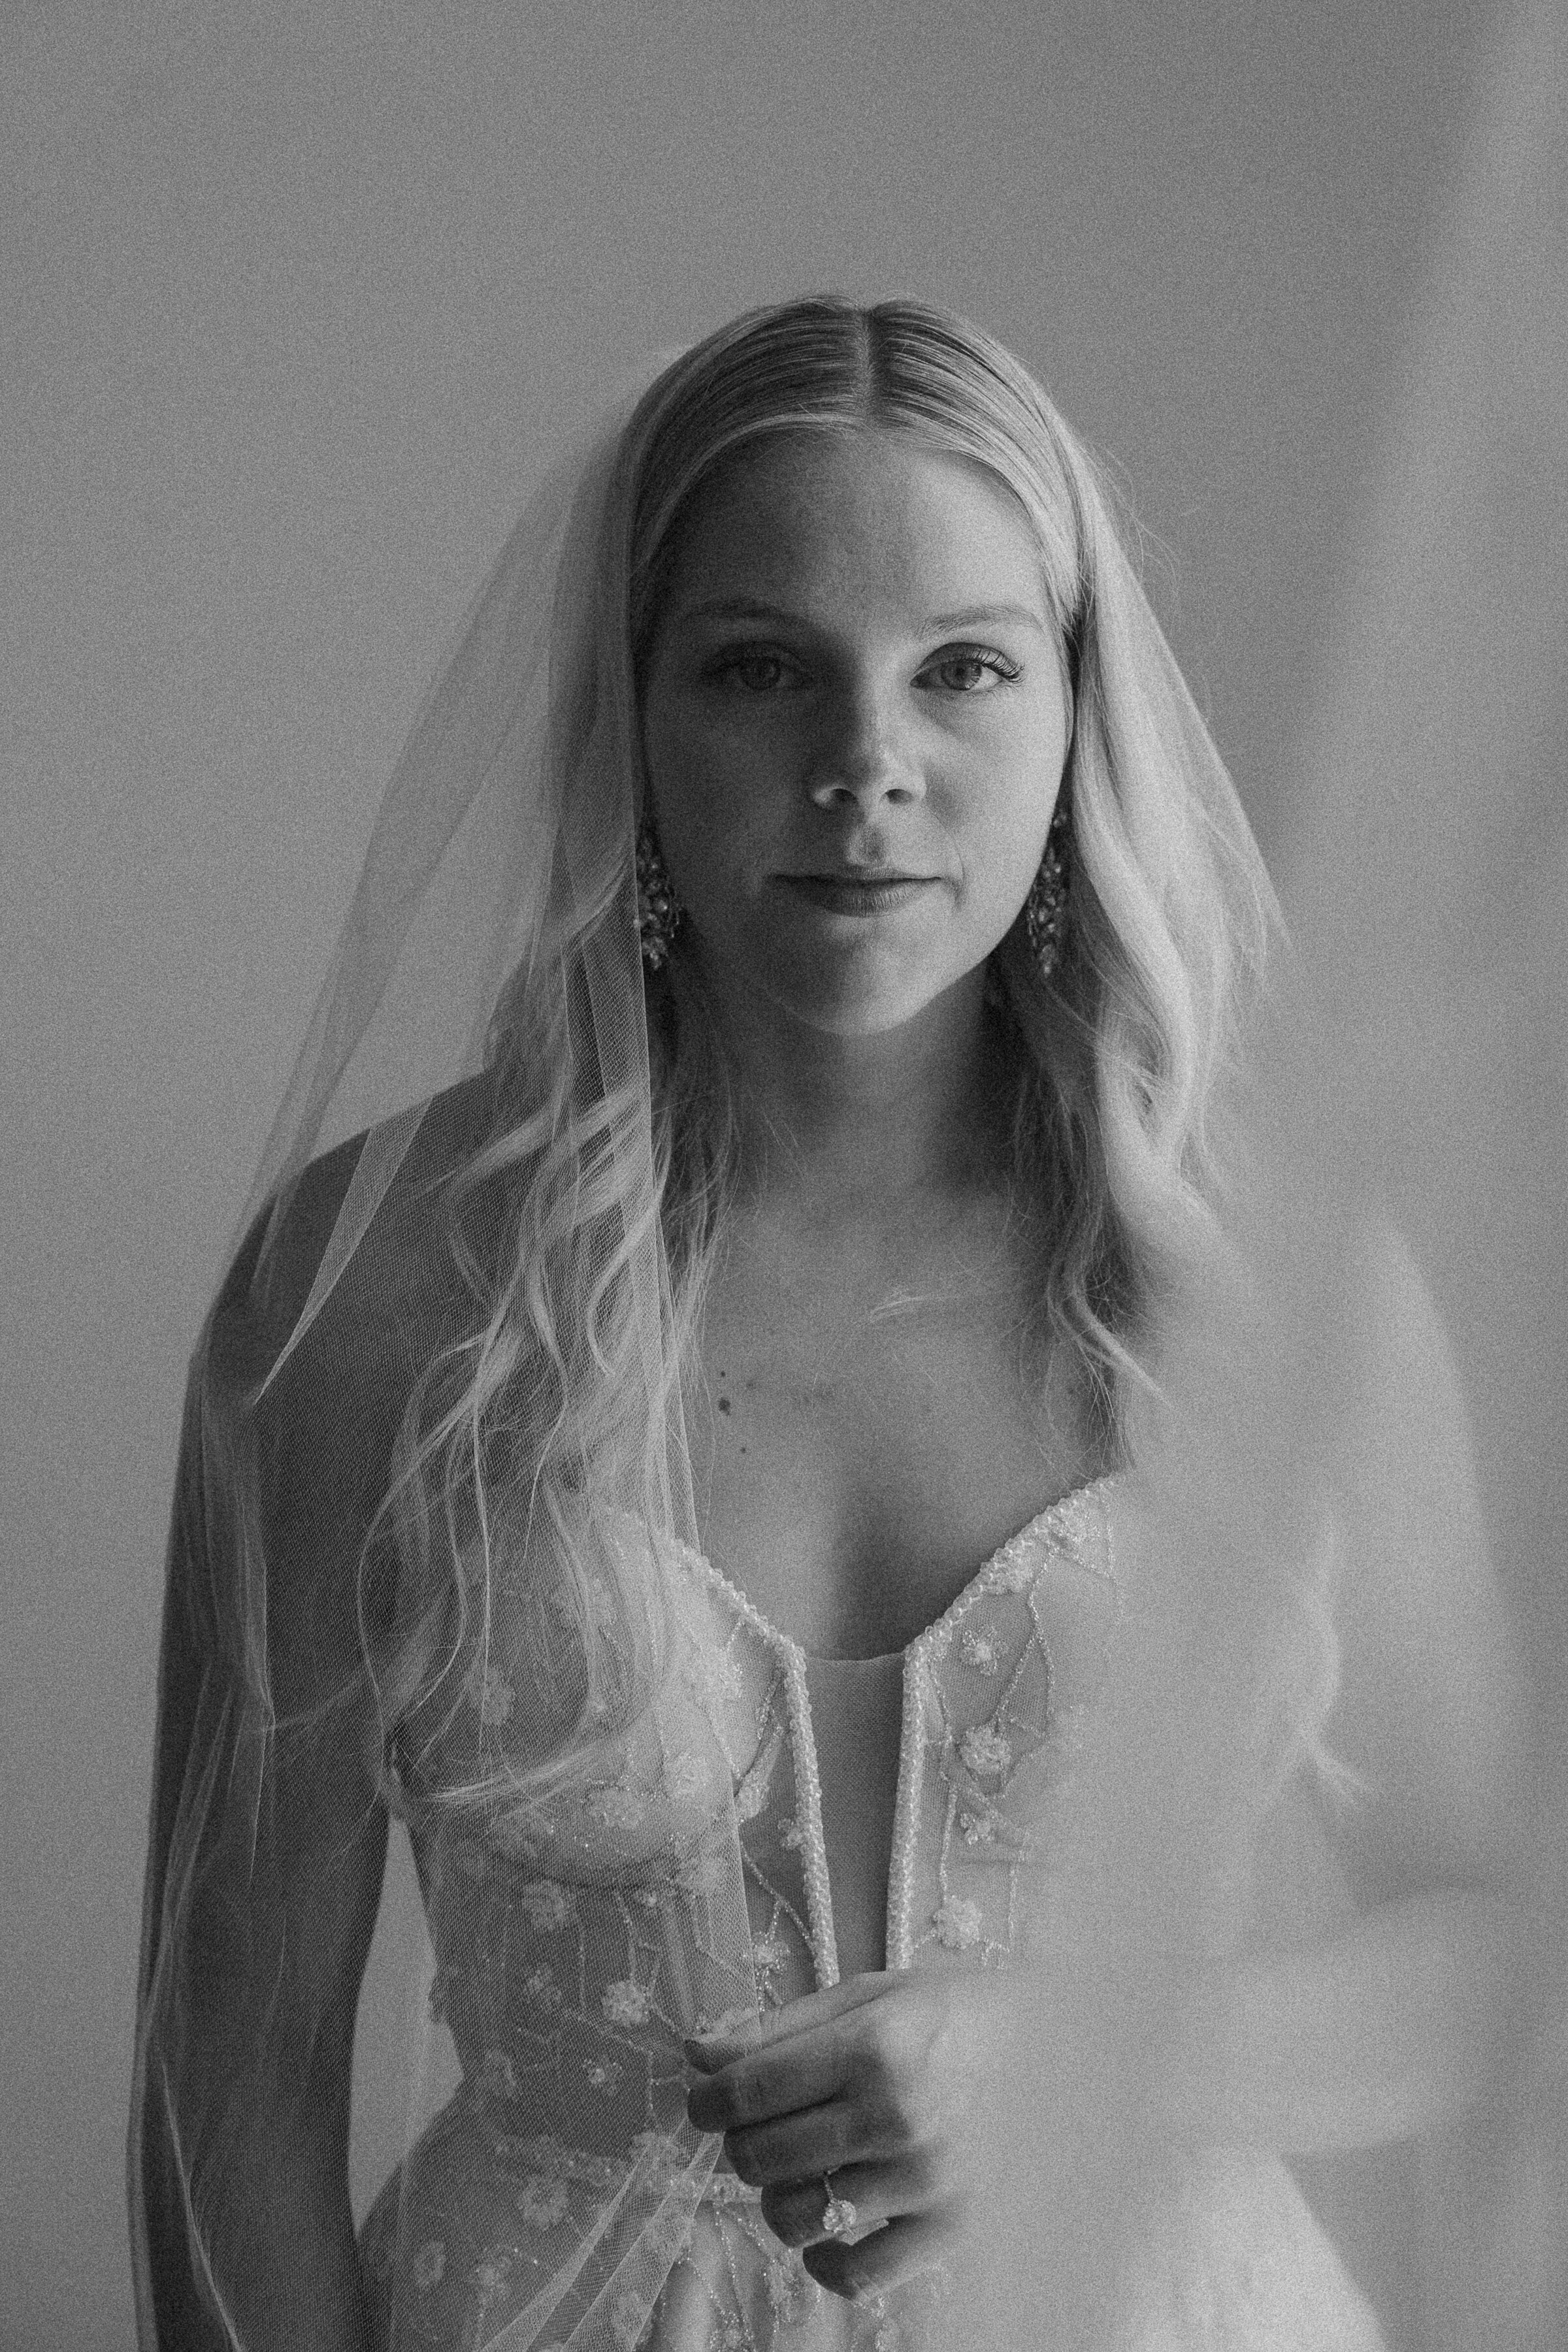 Bride in lace wedding dress looking serene with veil draped over her hair.